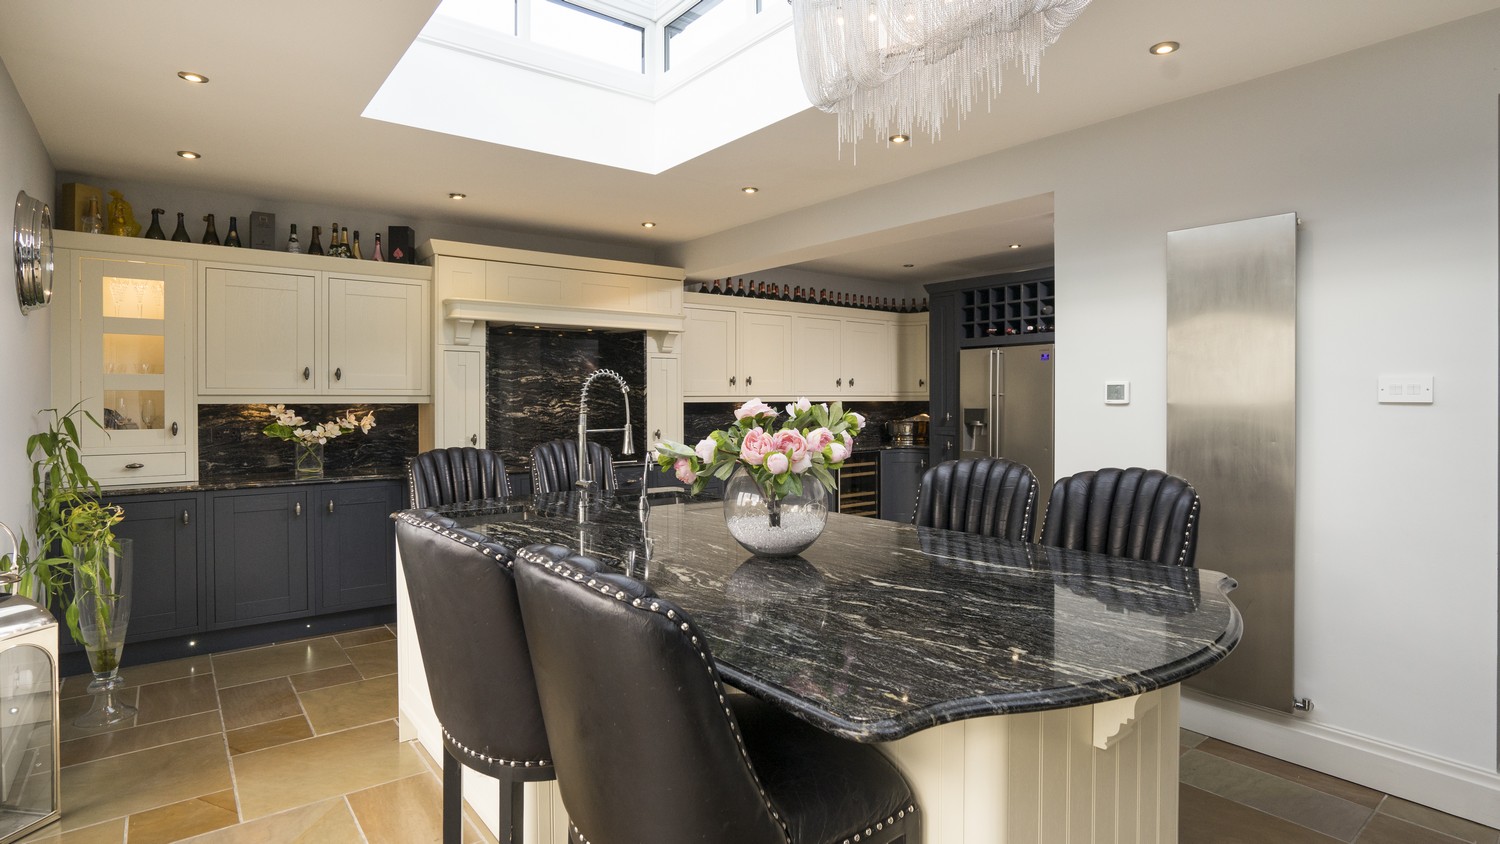 Full image of Ormskirk kitchen with large island used for both dining and preparing food, feature mantel and a wide range of cupboards and draws giving lots of storage.